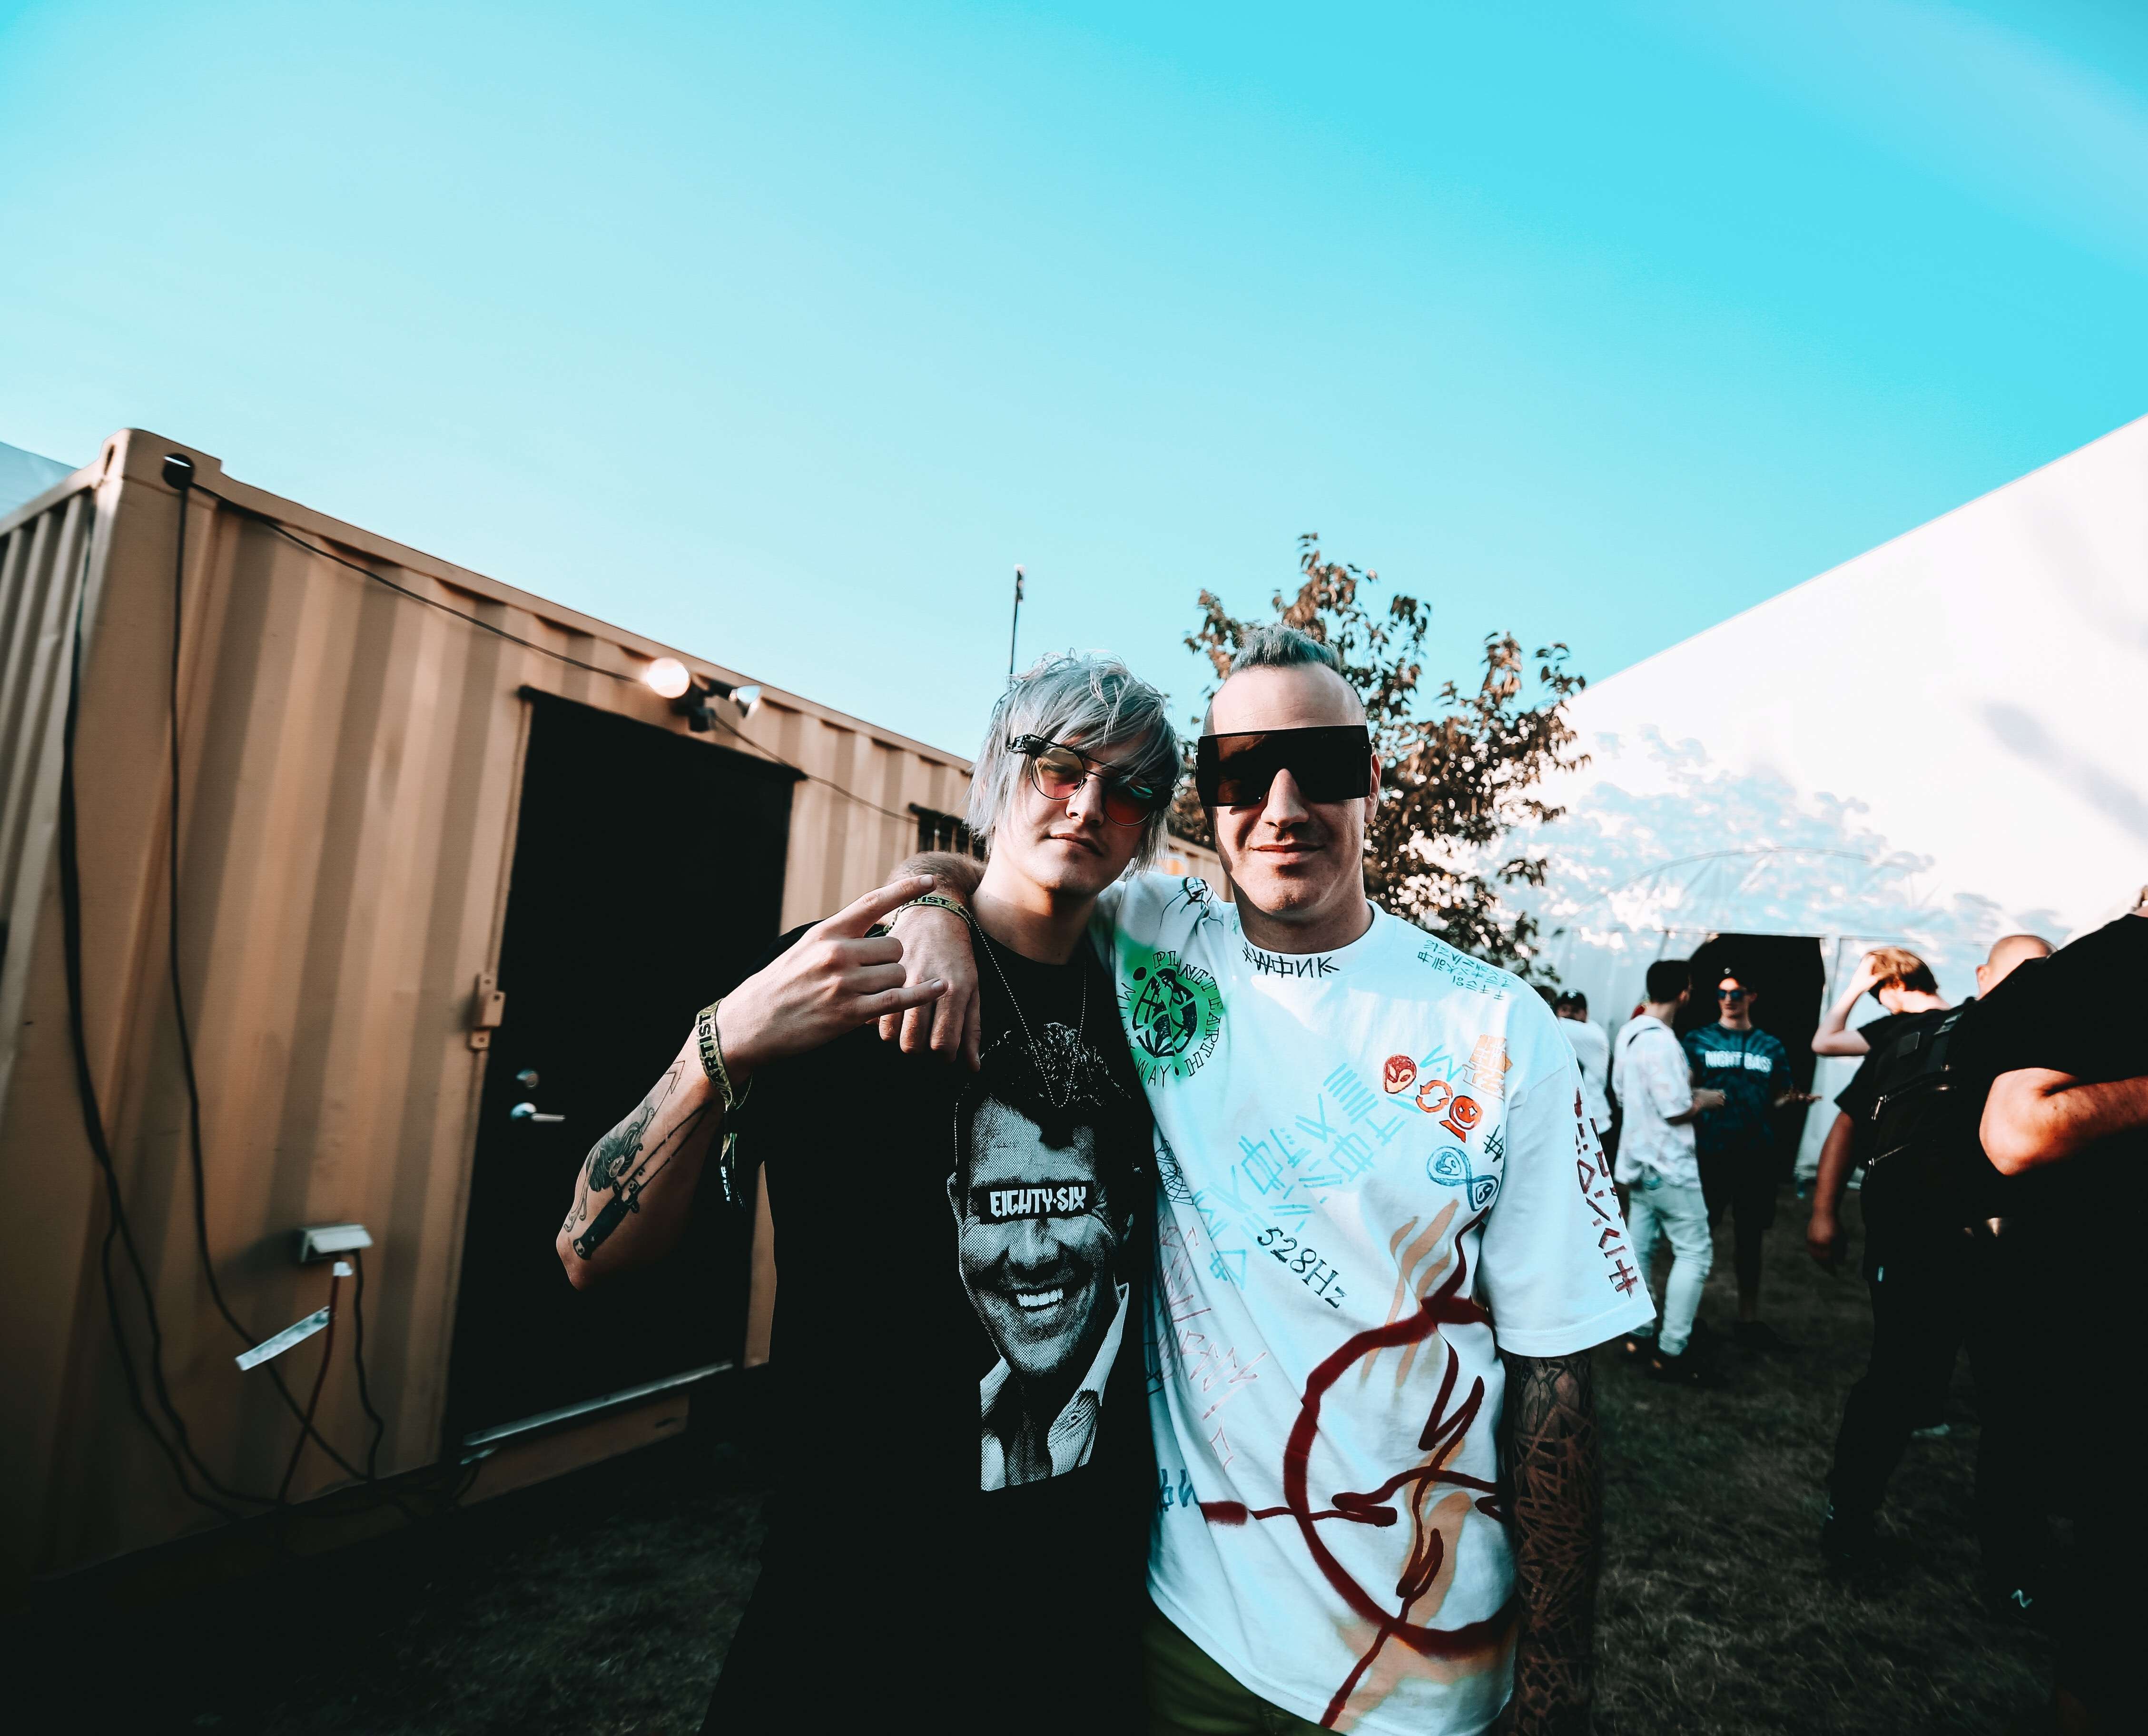 Exclusive: Brillz Shares His Personal Photo Diary From HARD Summer ...